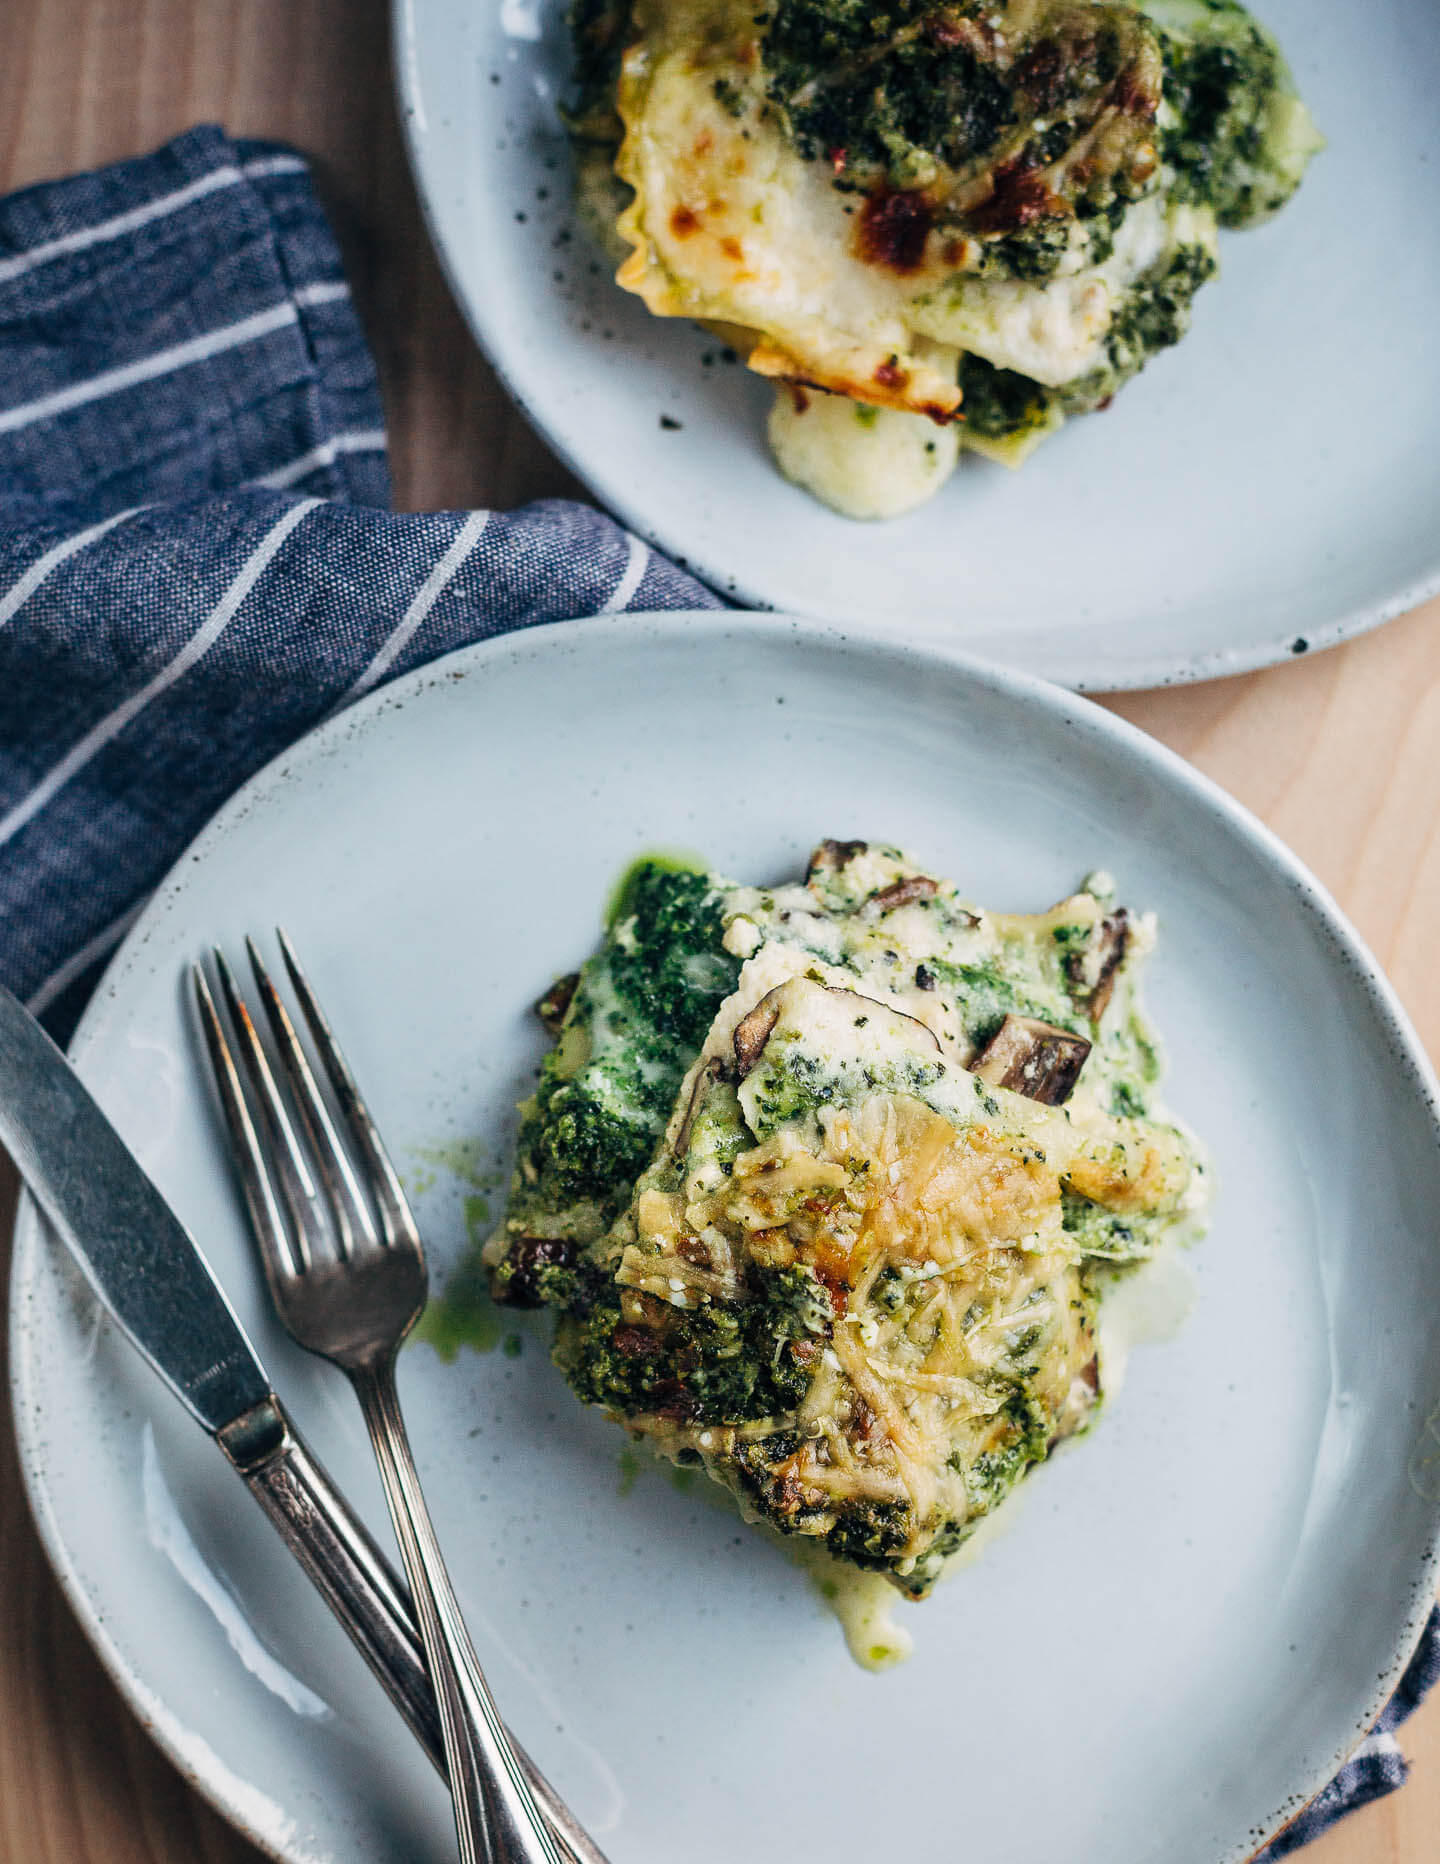 A savory vegetarian mushroom and pesto lasagna and thoughts on looking out for community in the midst of a crisis.